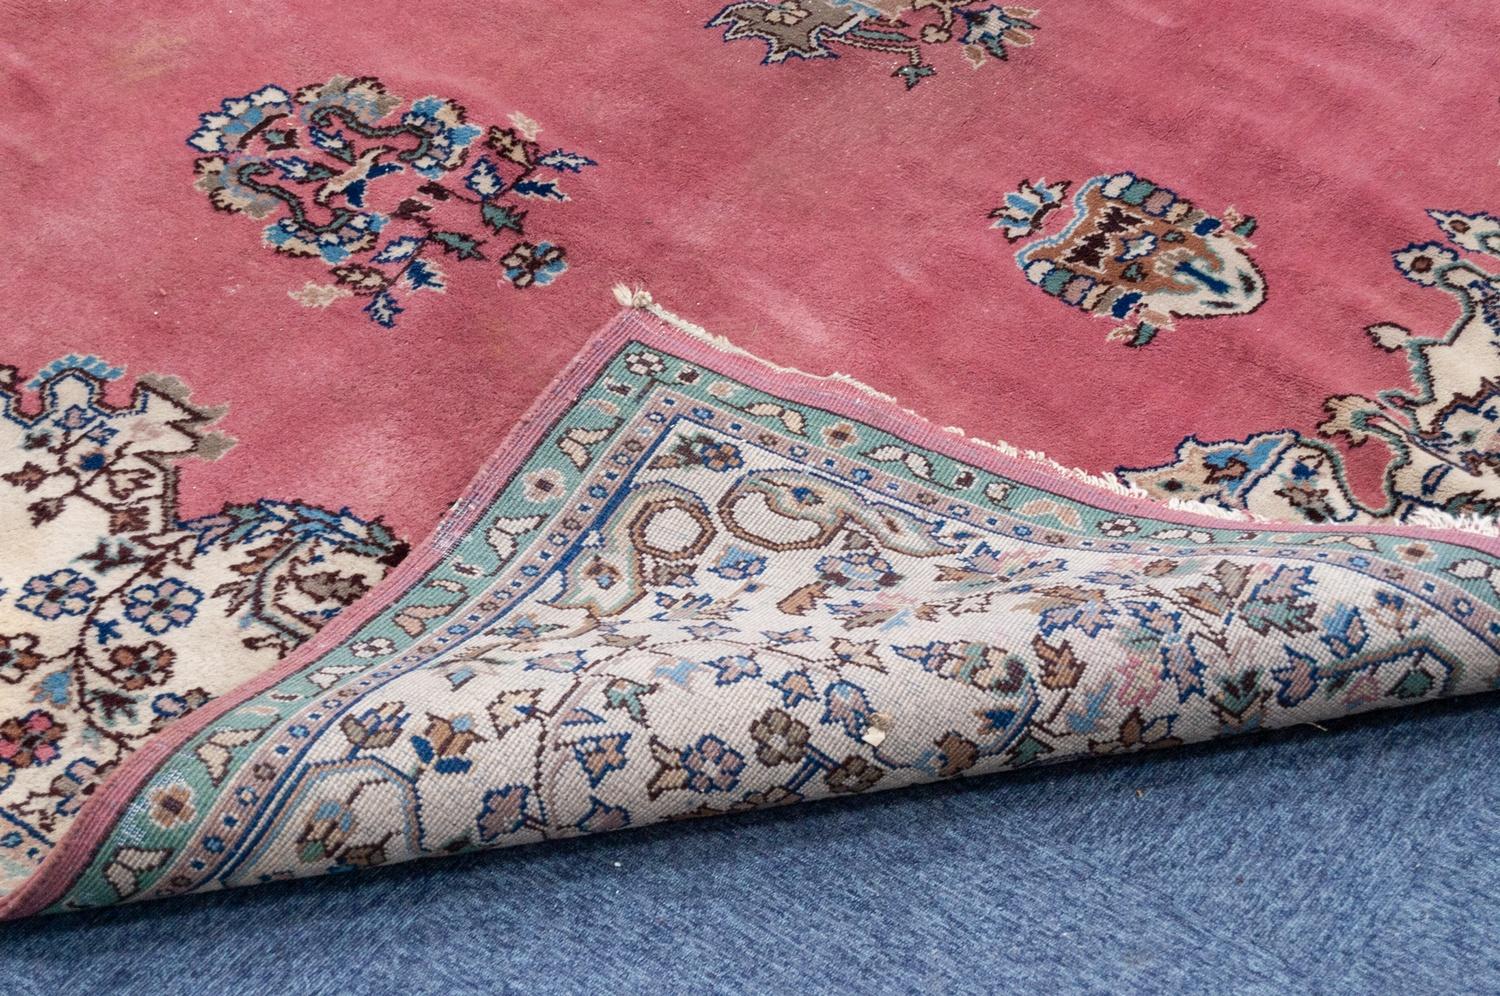 LARGE, POSSIBLY EUROPEAN, PERSIAN STYLE CARPET, having a rose pink field, large green, brown and - Image 3 of 3